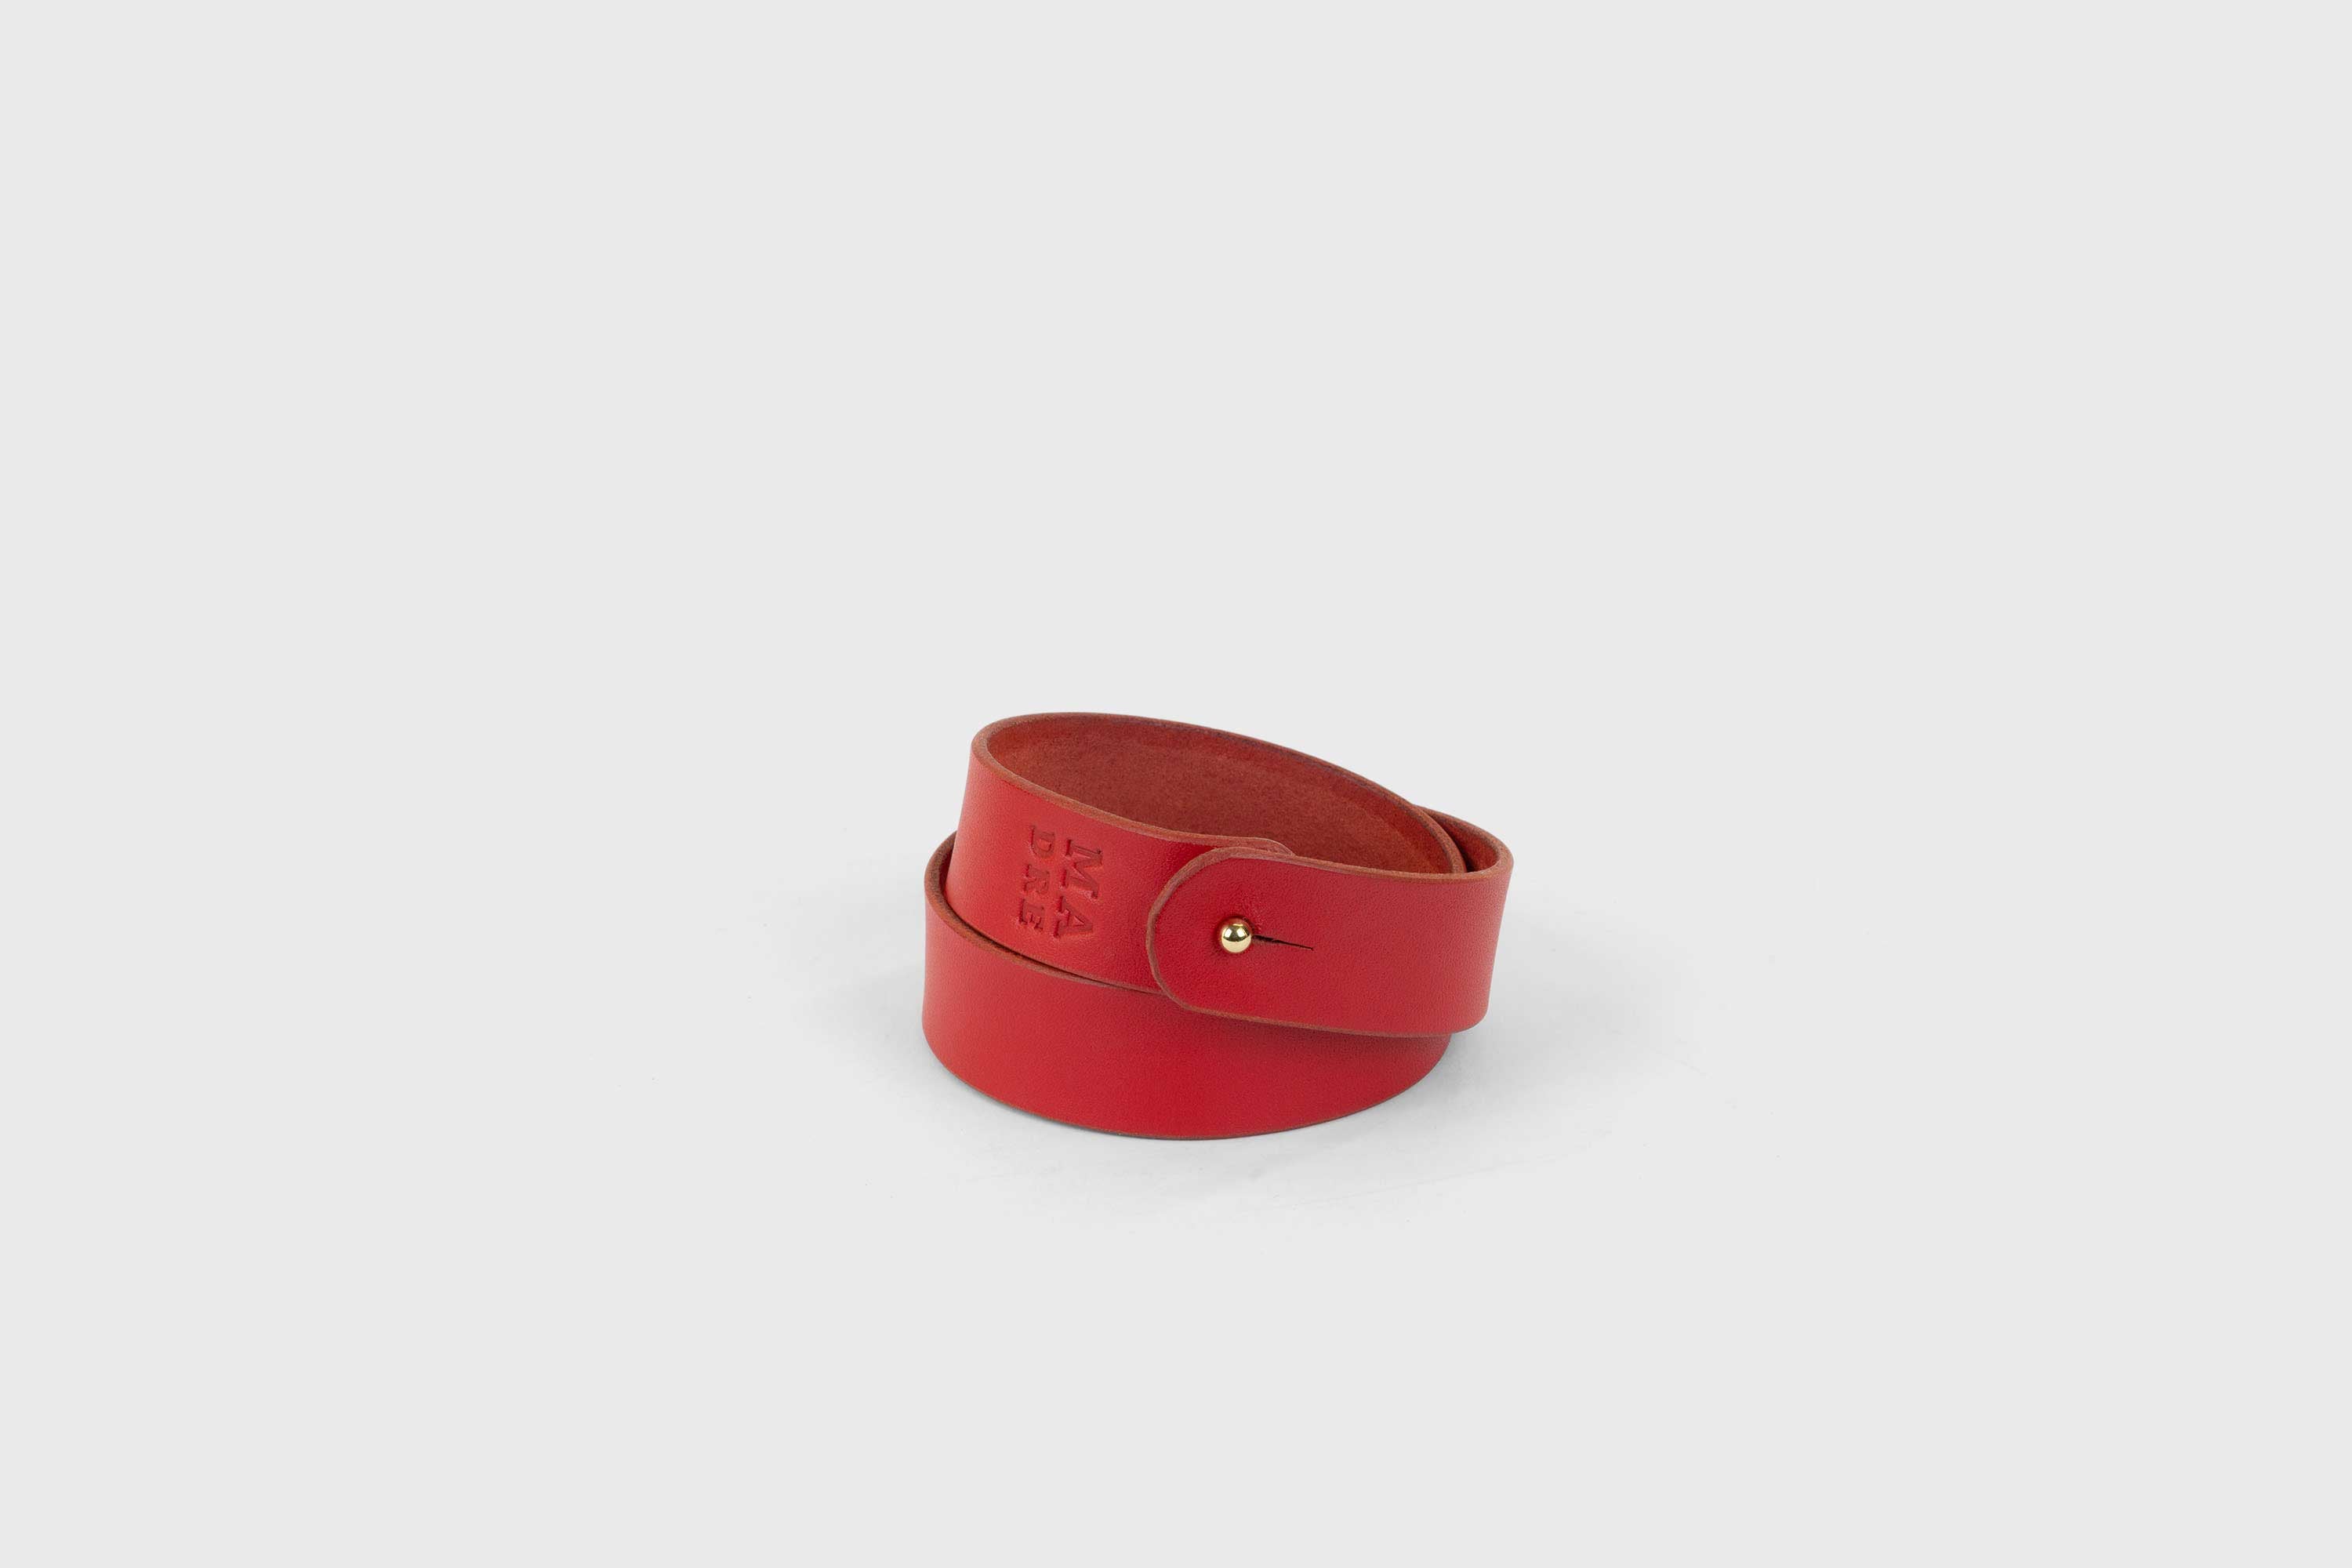 Leather Bracelet Double Wide Red Color Full Grain Leather Vegetable Tanned Premium Gold Handcrafted Minimalistic Design Atelier Madre Manuel Dreesmannn Barcelona